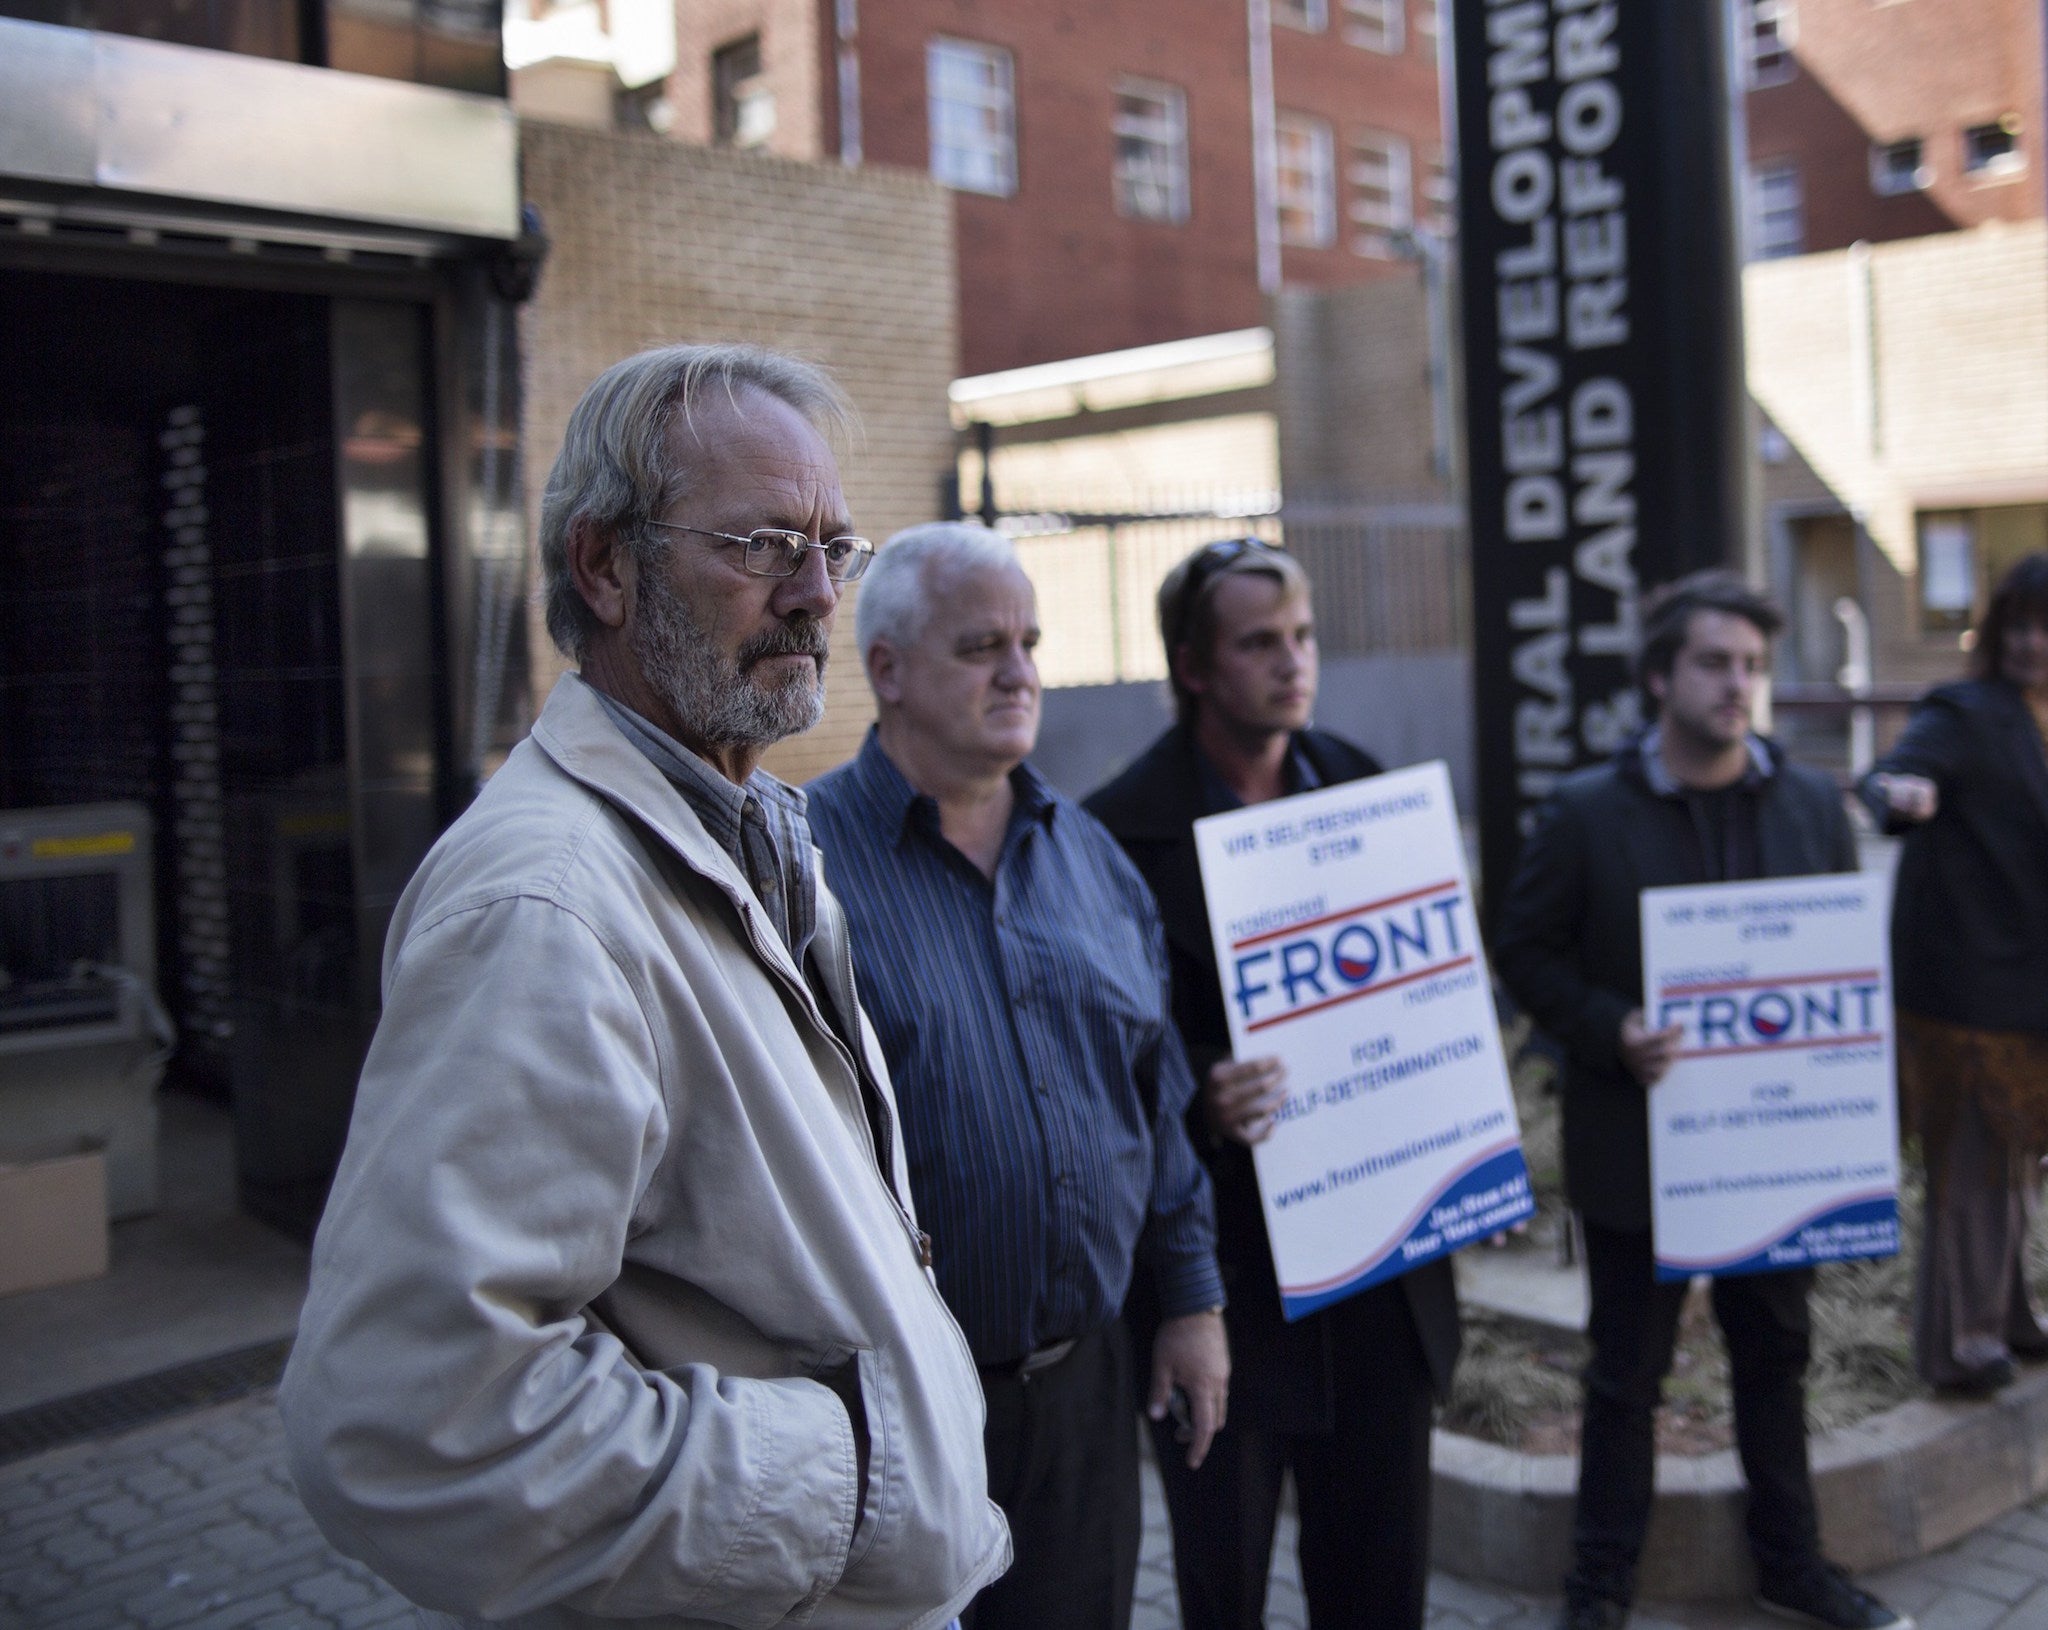 Hannes Engelbrecht (L) leader of the Front National party, speaks to the media on April 24, 2014 as he lodges a land claim on behalf of the old Boer Republics in Pretoria